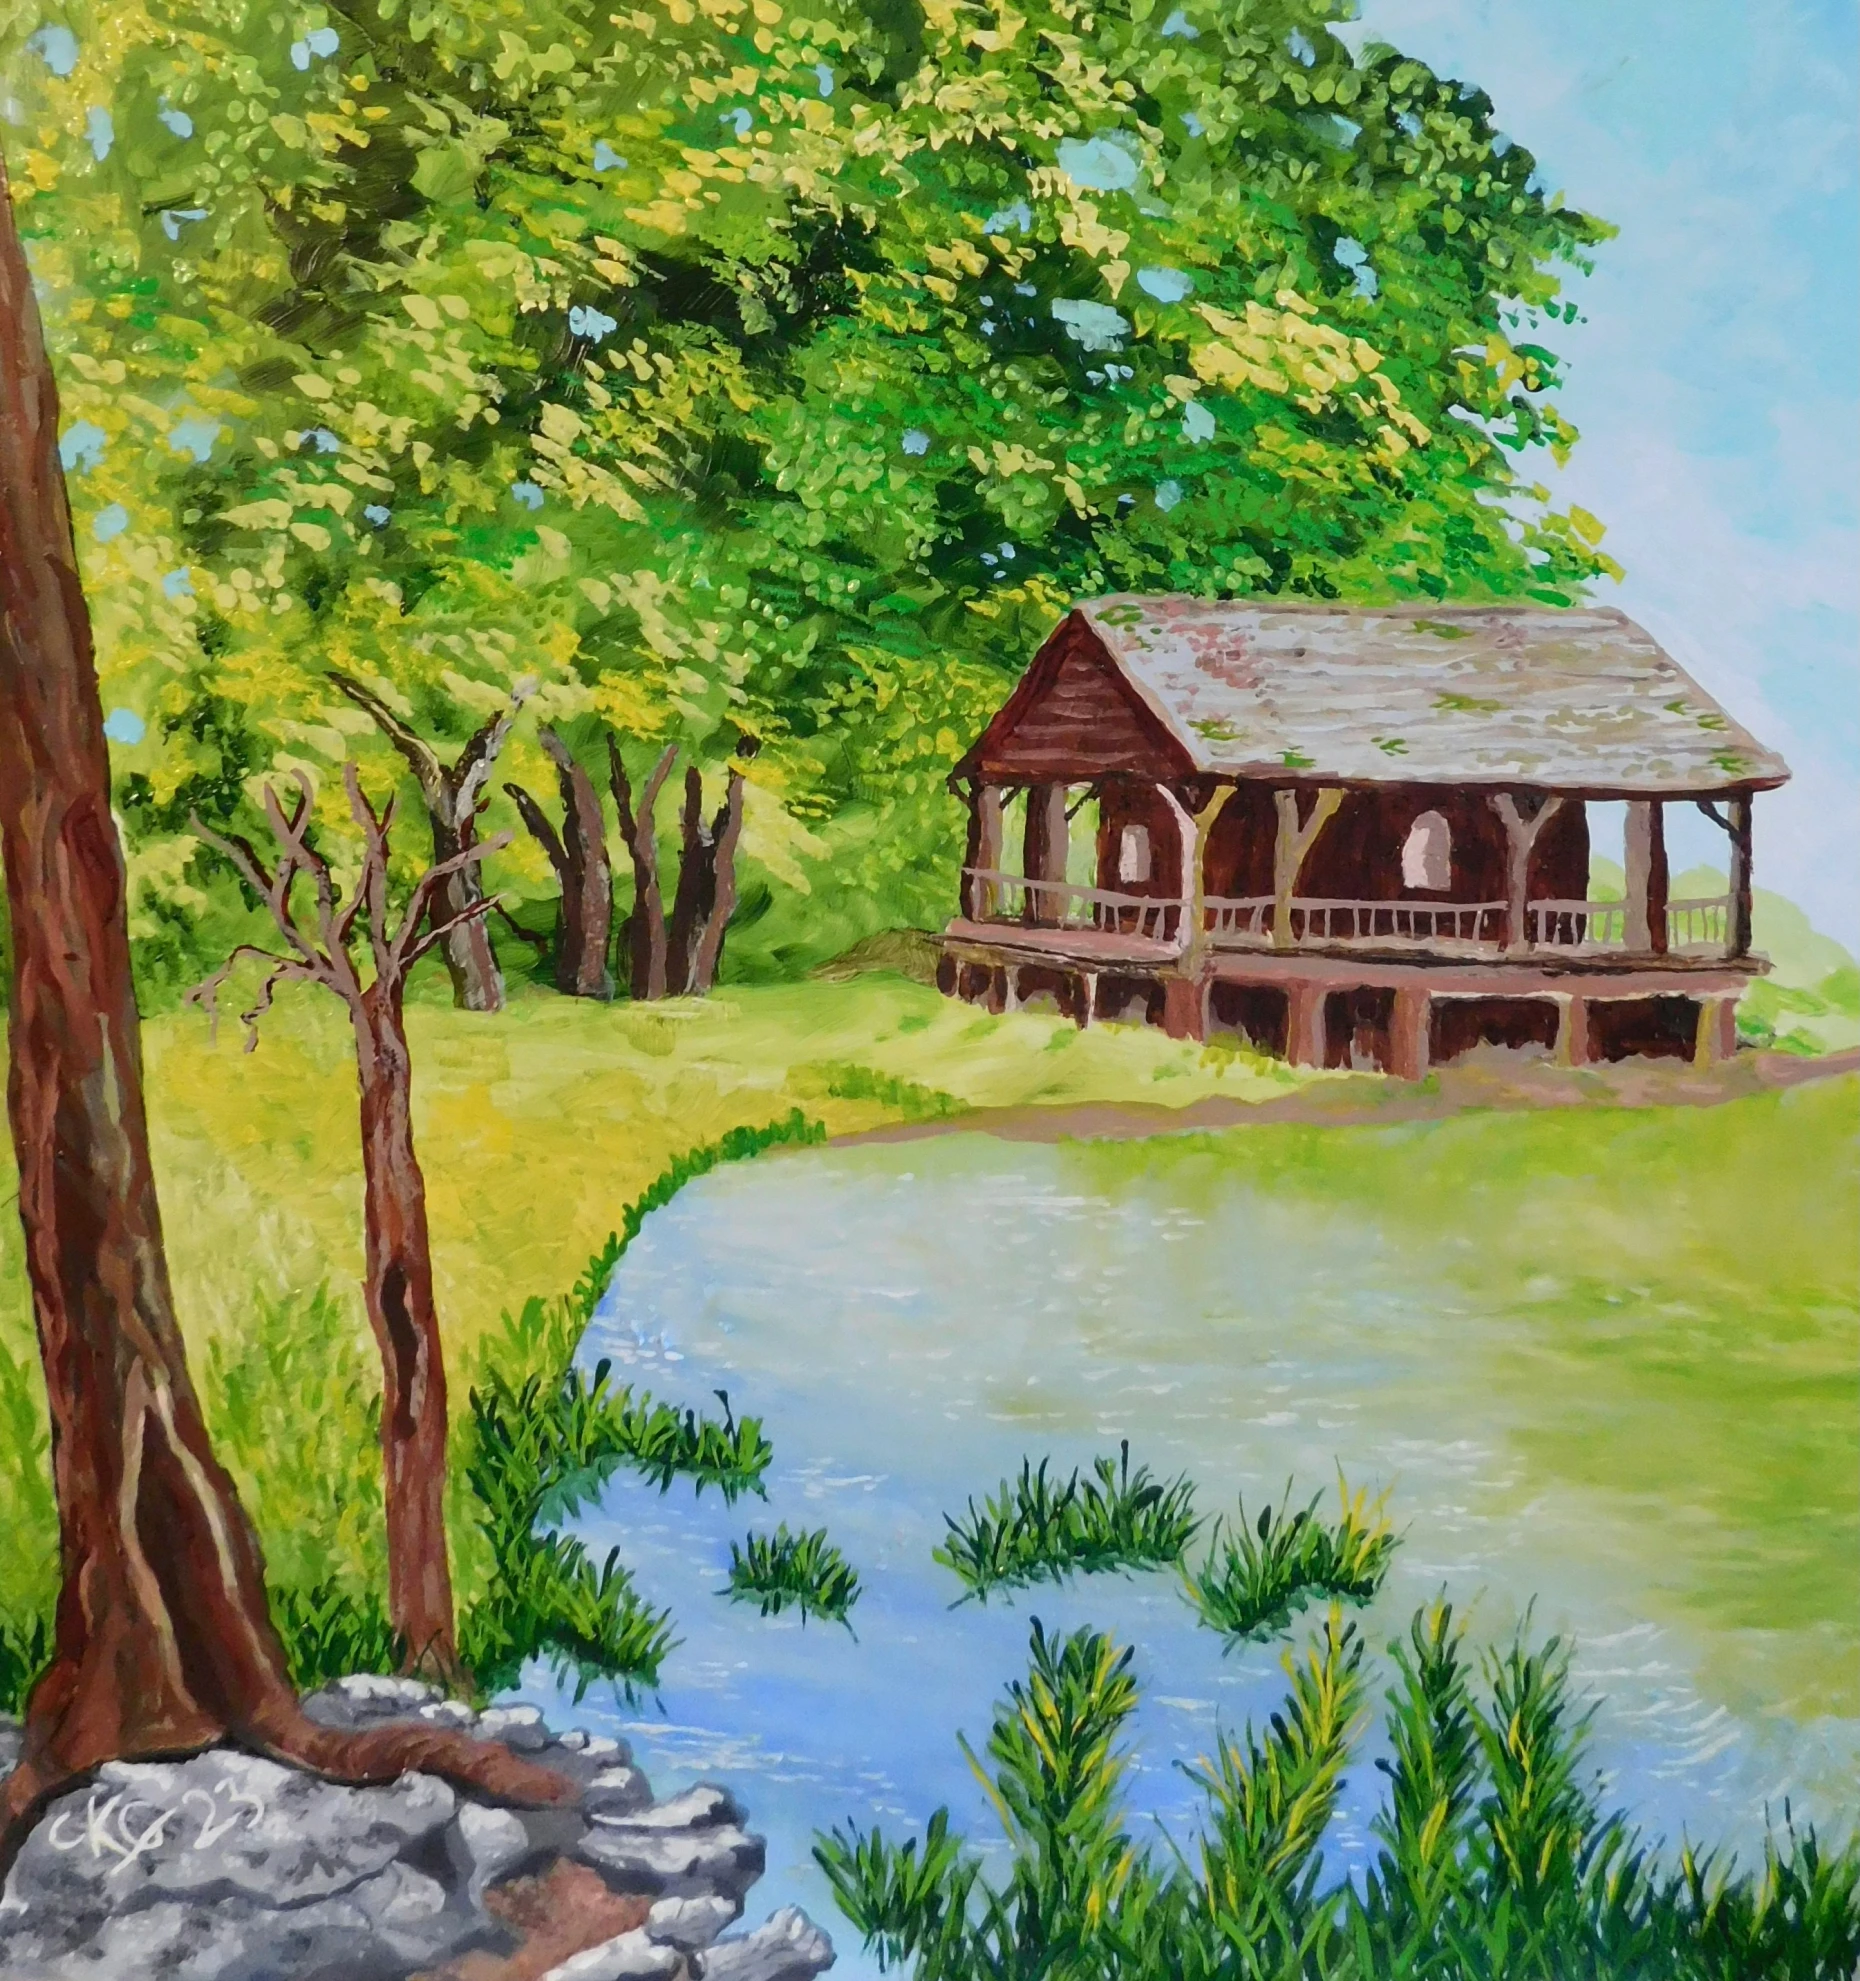 painting of an old house in the middle of a green field